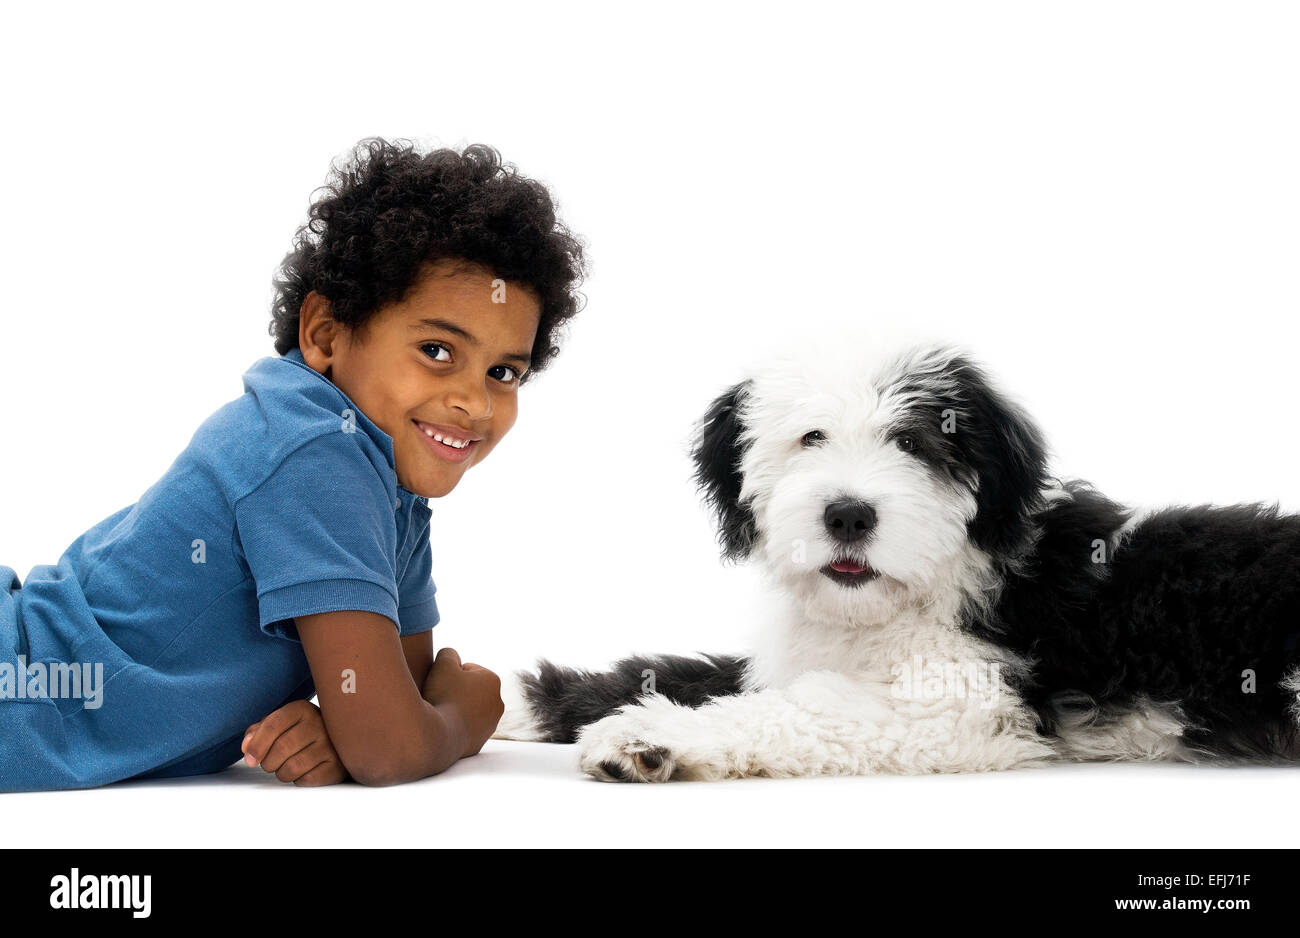 Boy, 8 years, with an Old English Sheepdog puppy, 4 months Stock Photo